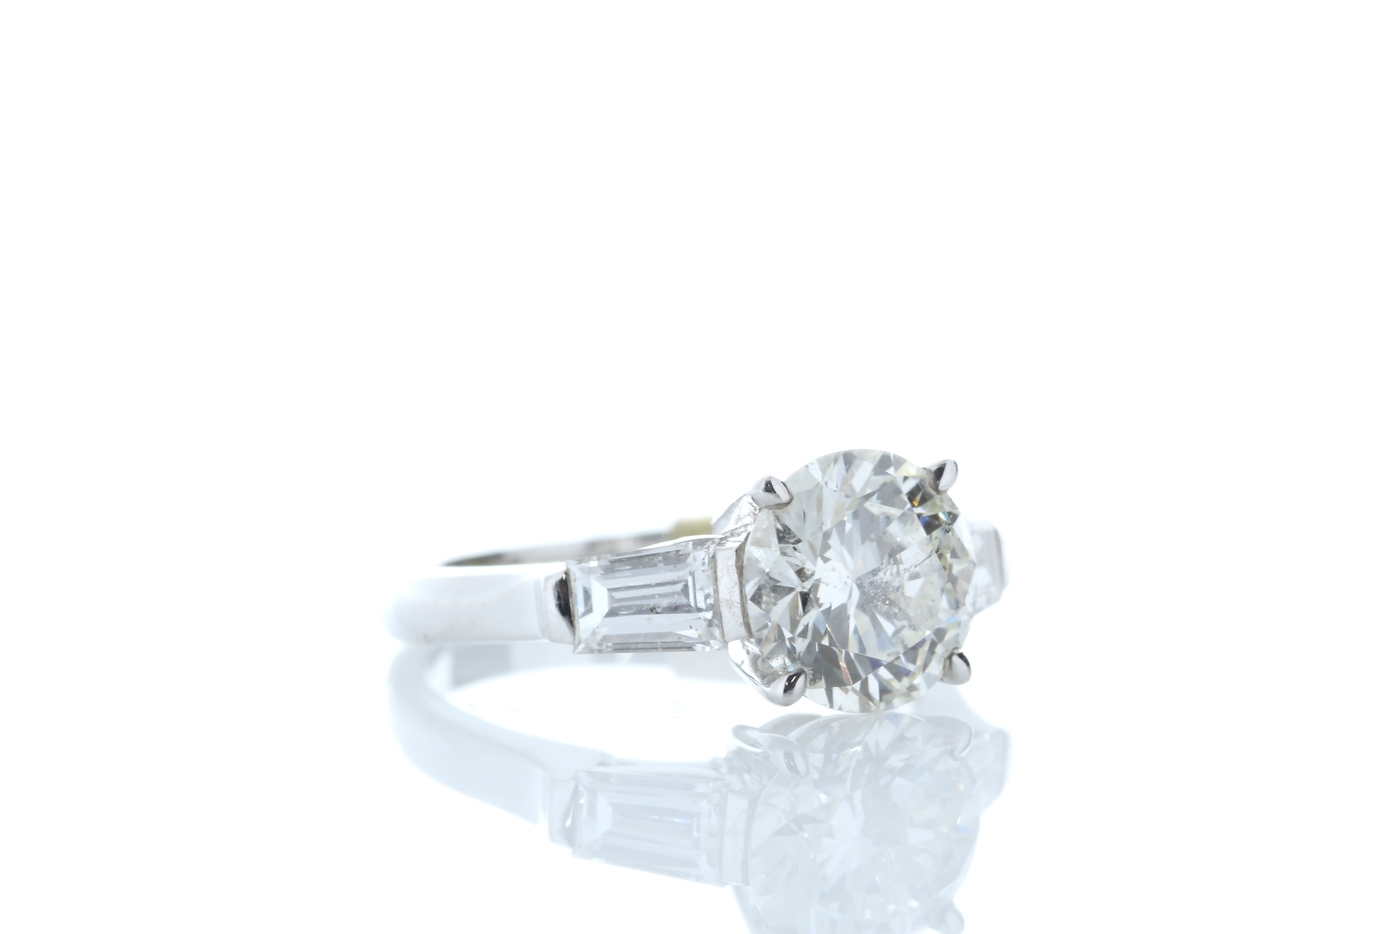 18ct White Gold Baguette Shoulders Diamond Ring 2.20 Carats - Image 4 of 5